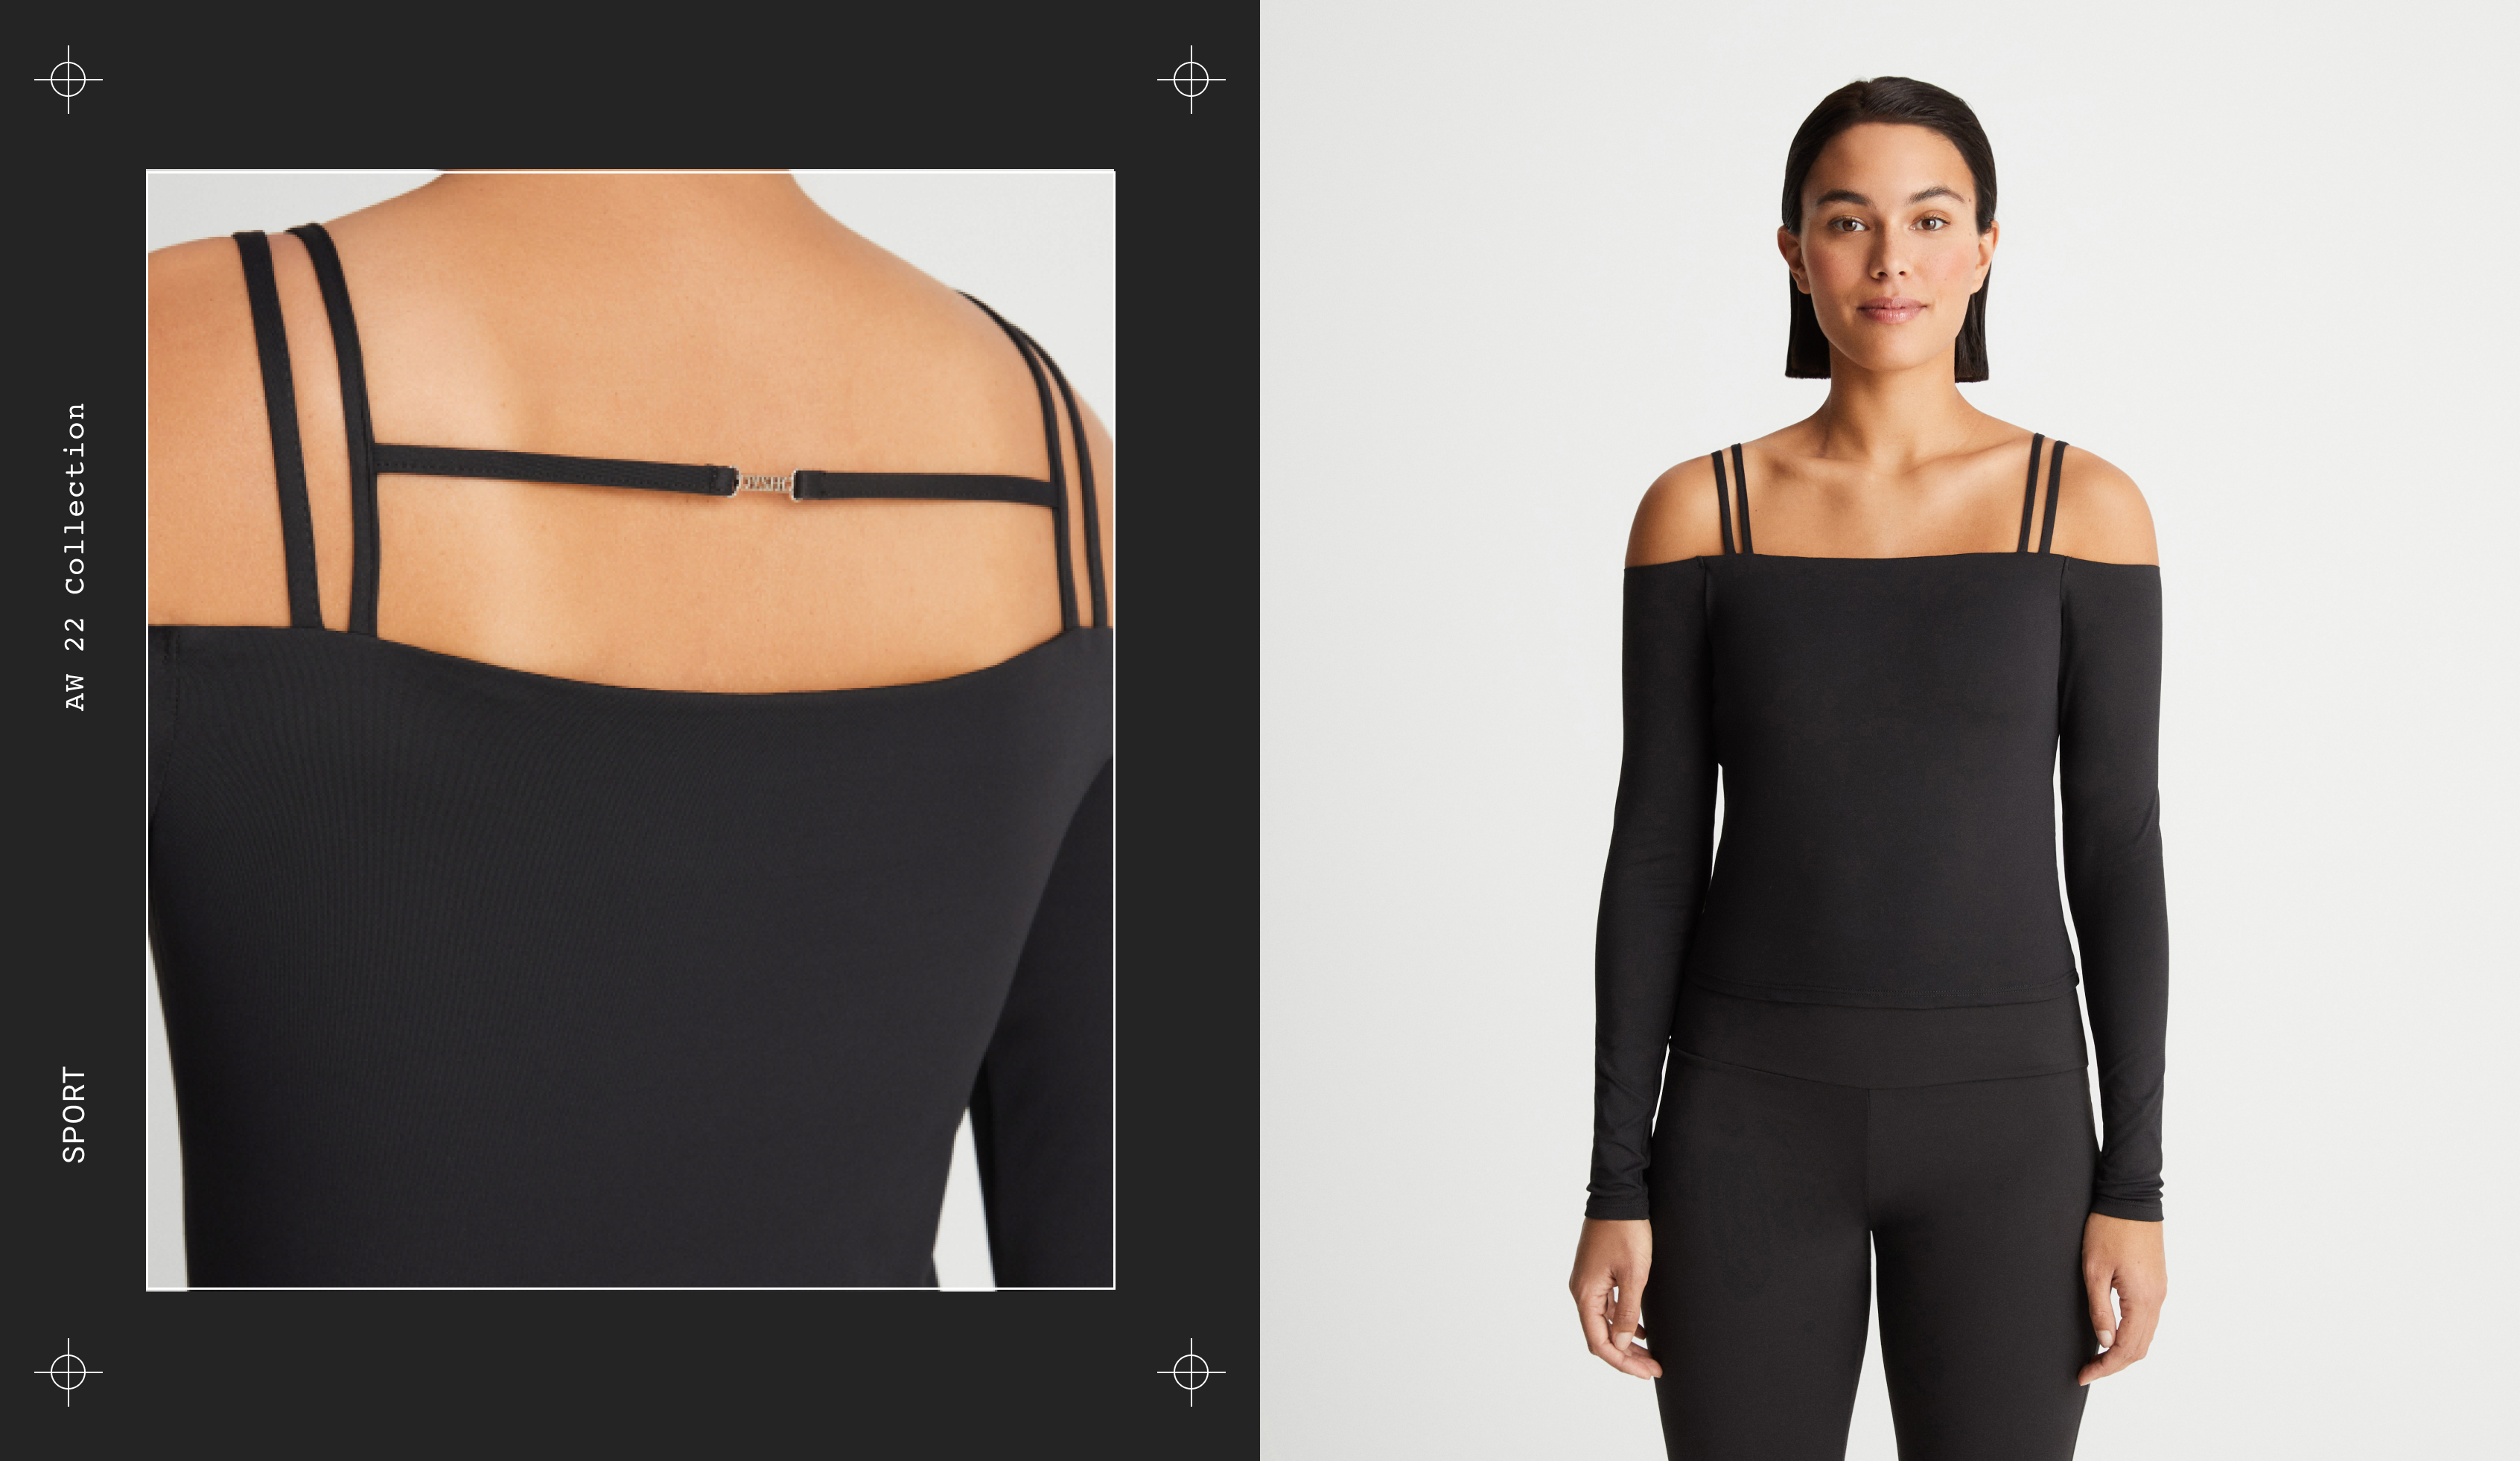 Long-sleeved strappy top